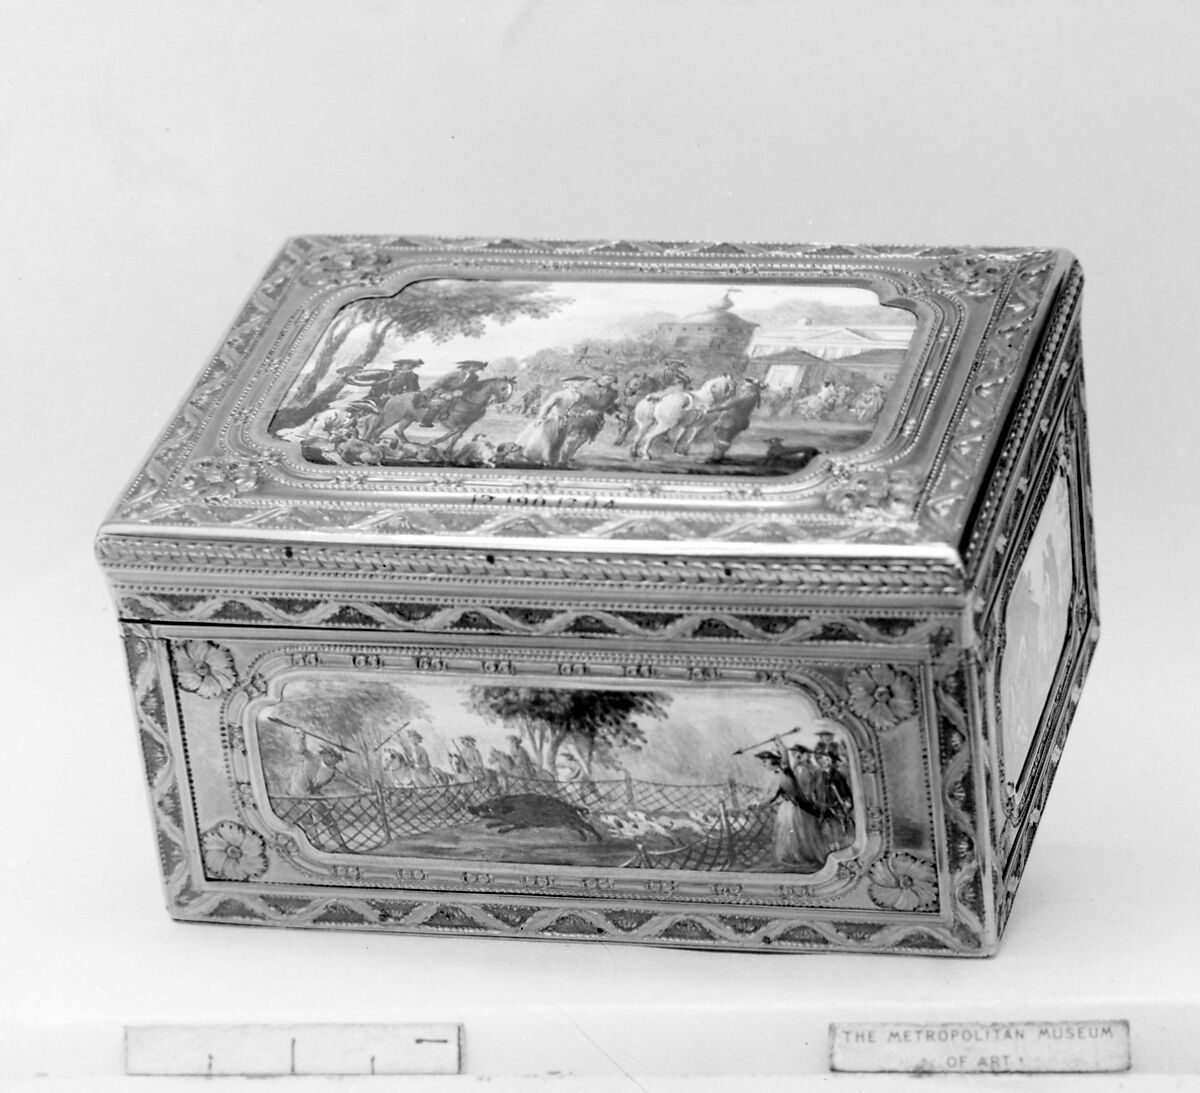 Snuffbox with hunting scene, Gold, enamel, French, Paris 